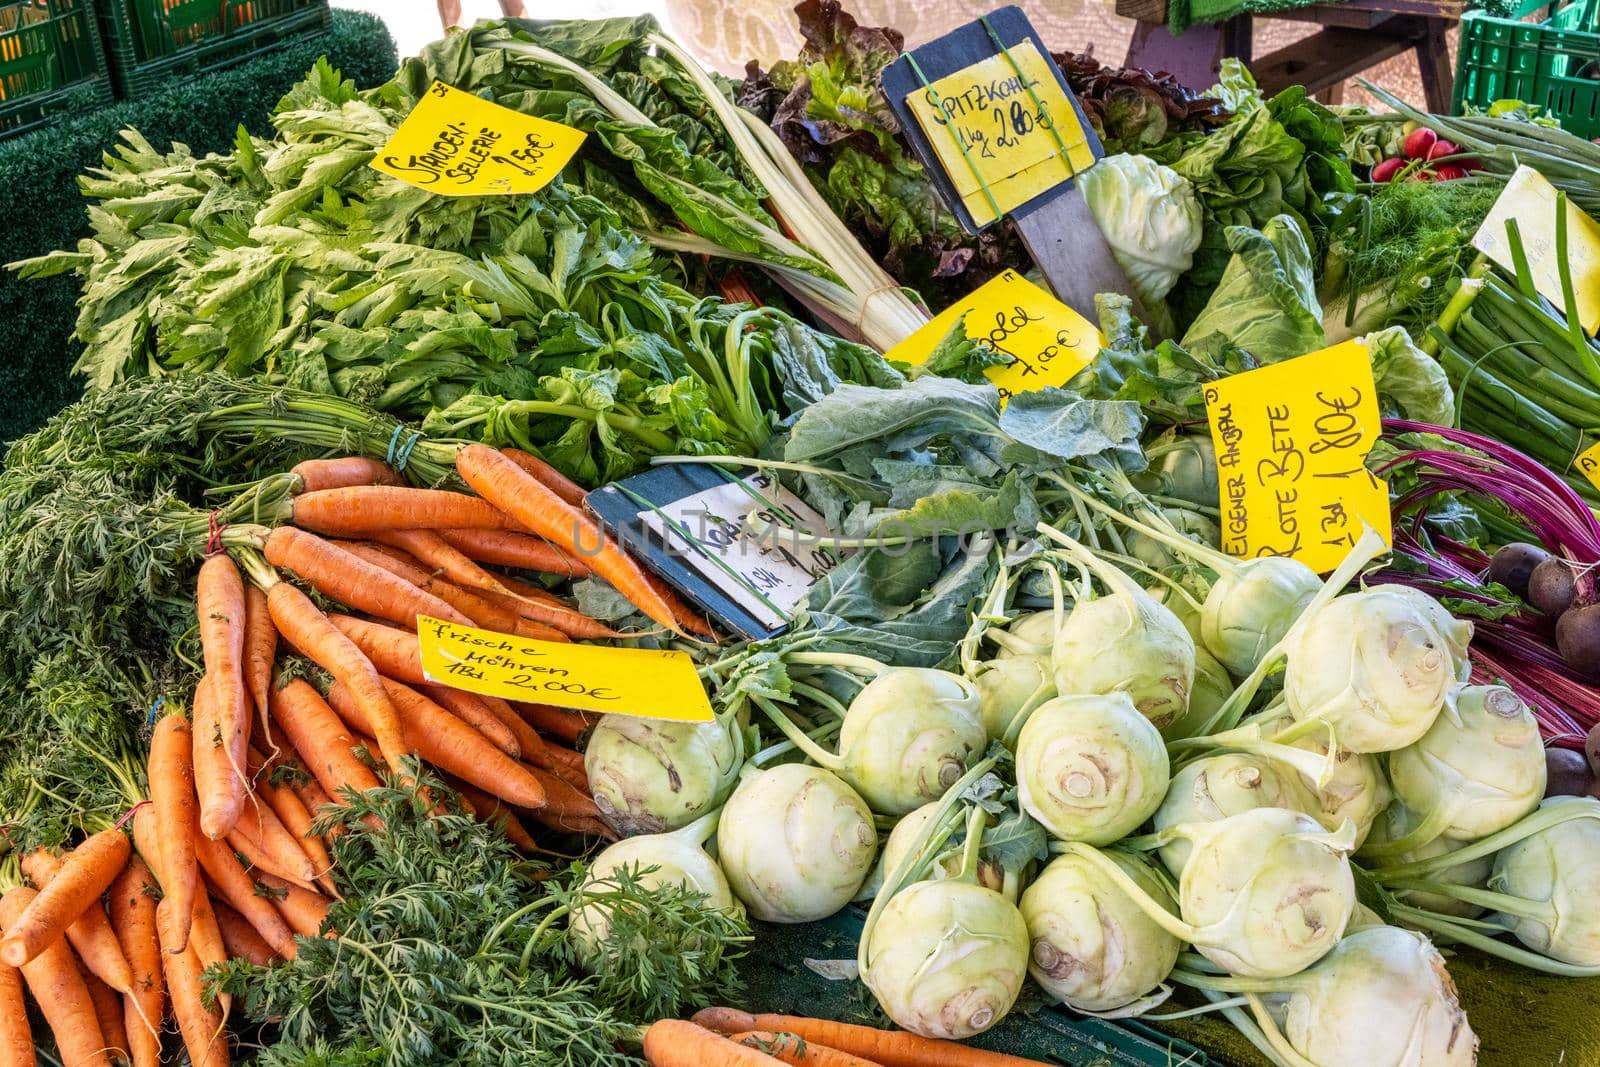 Kohlrabi, carrots and other vegetables for sale at a market